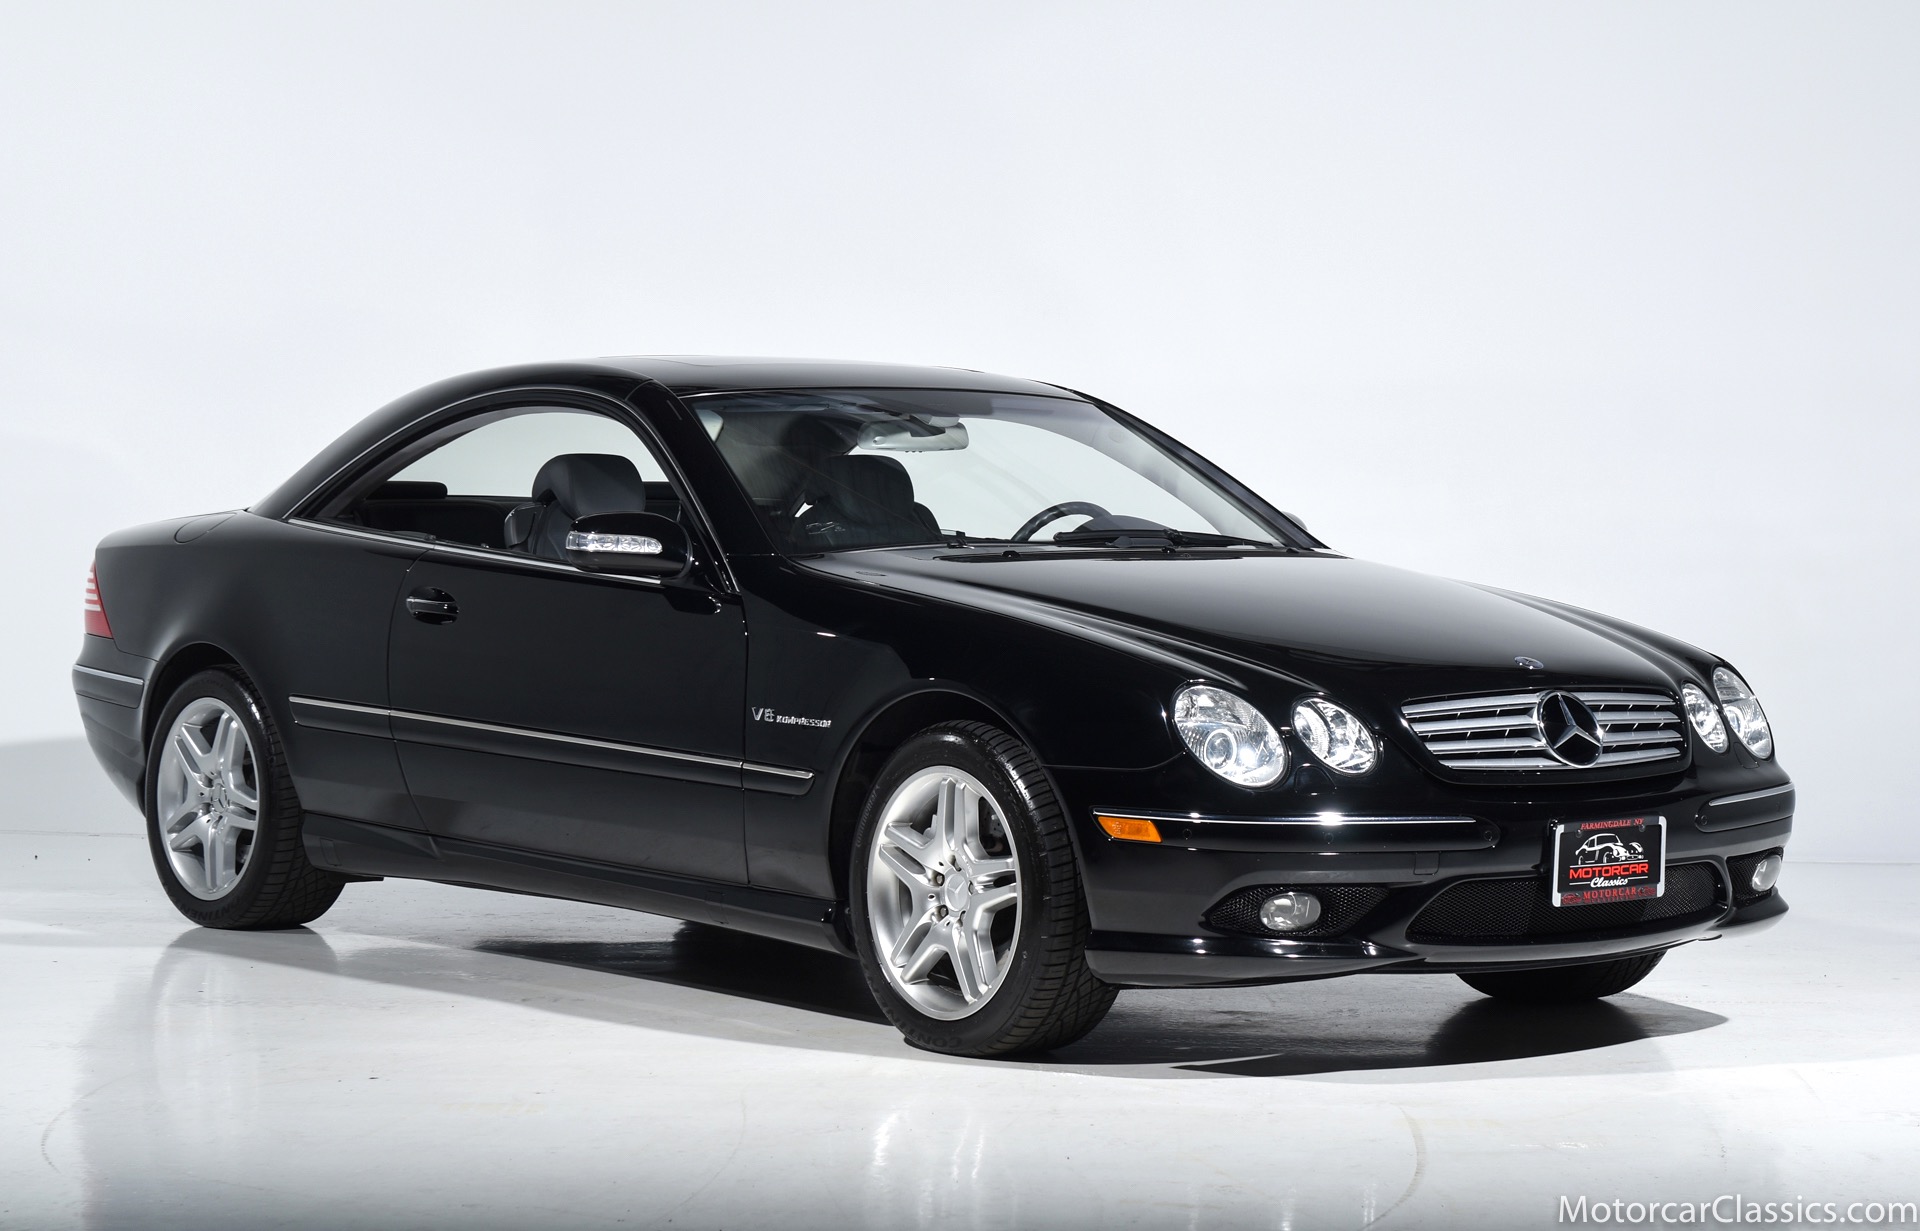 Used 2003 Mercedes-Benz CL-Class CL 55 AMG For Sale ($36,900) | Motorcar  Classics Stock #2085